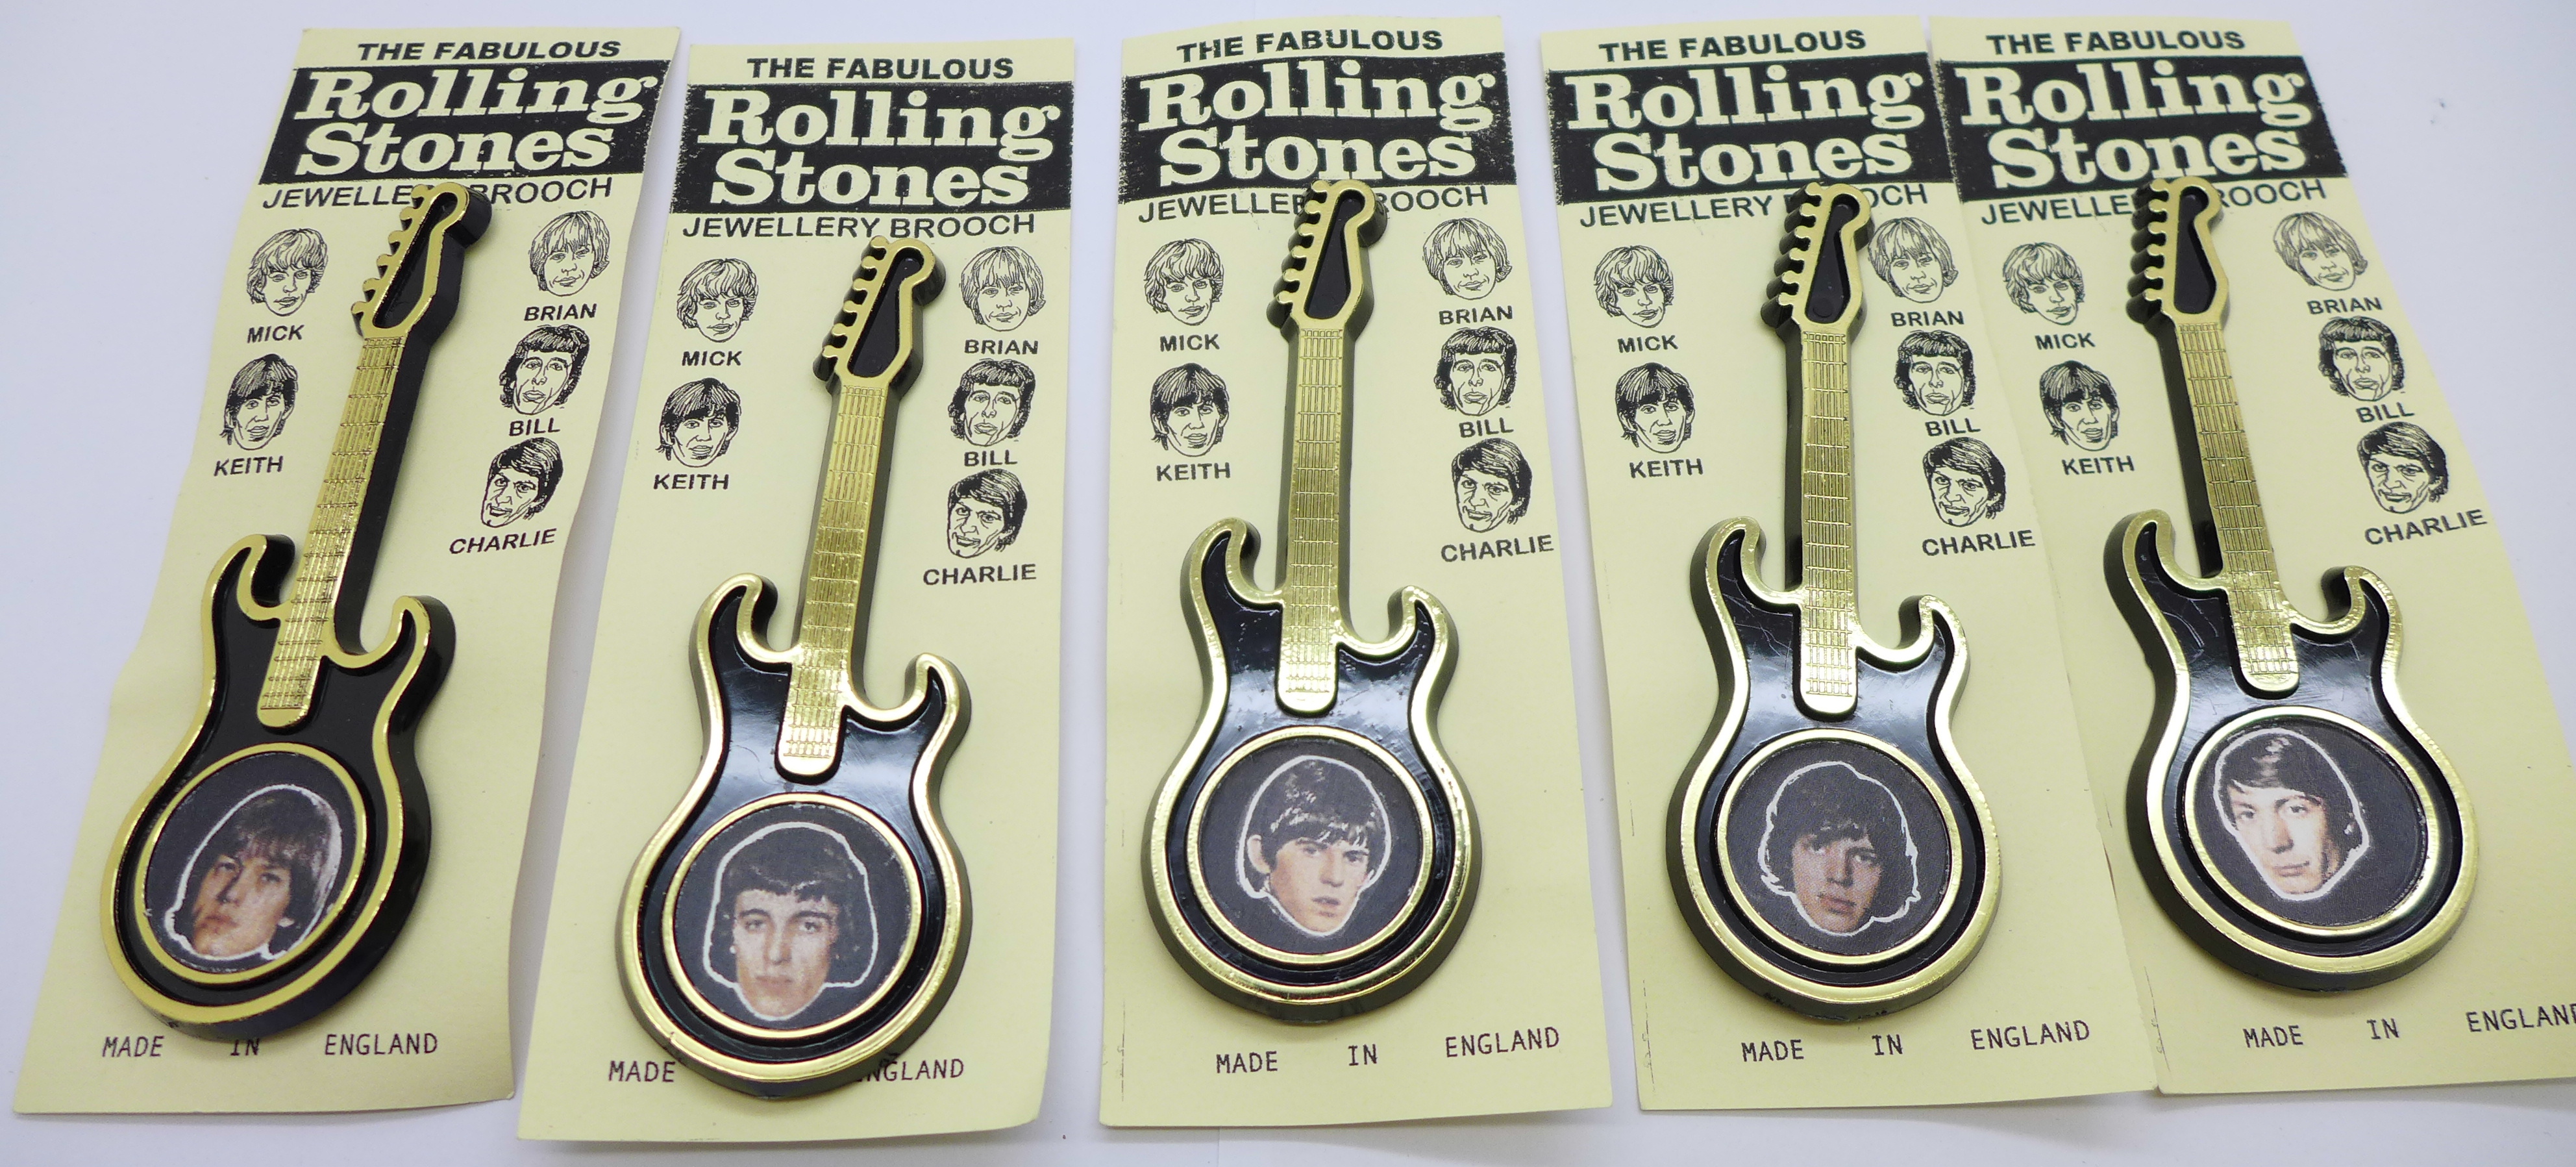 A set of five Rolling Stones guitar brooches on card